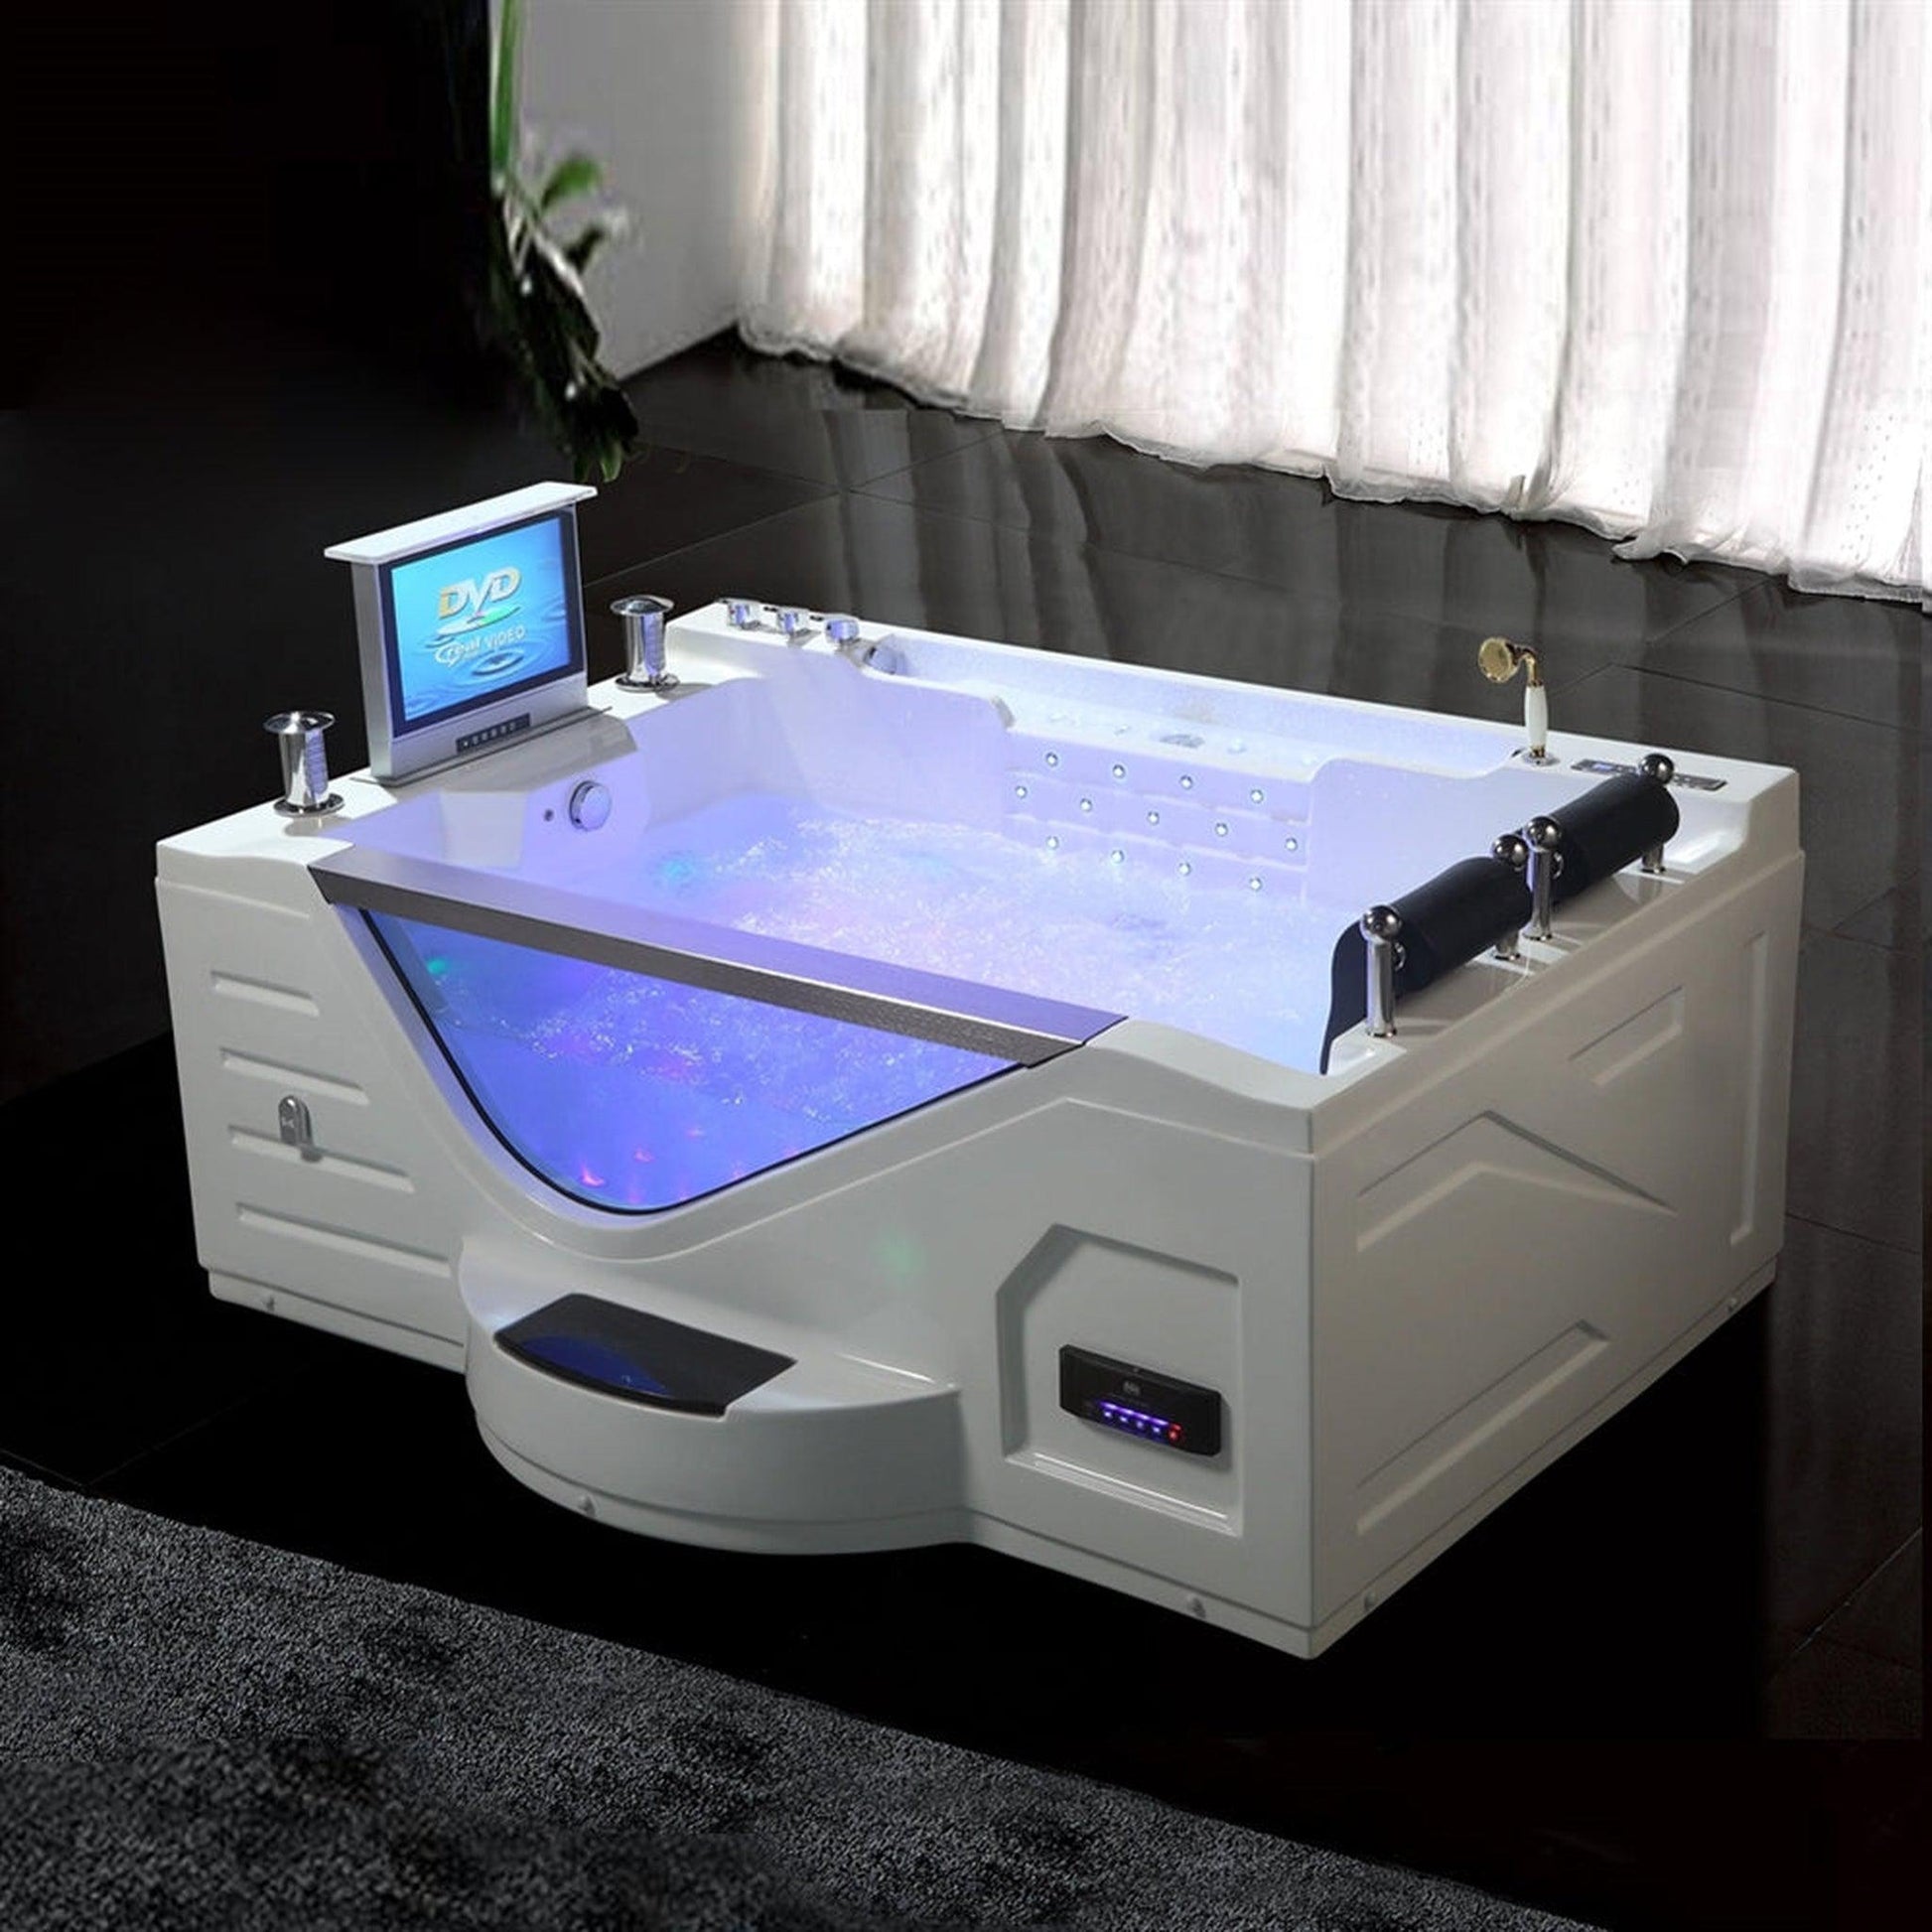 Fontana Sierra 77" x 57" White Rectangular Freestanding Air and Whirlpool Massage Indoor Acrylic Bathtub With Bubbles LED Multicolor Light and TV